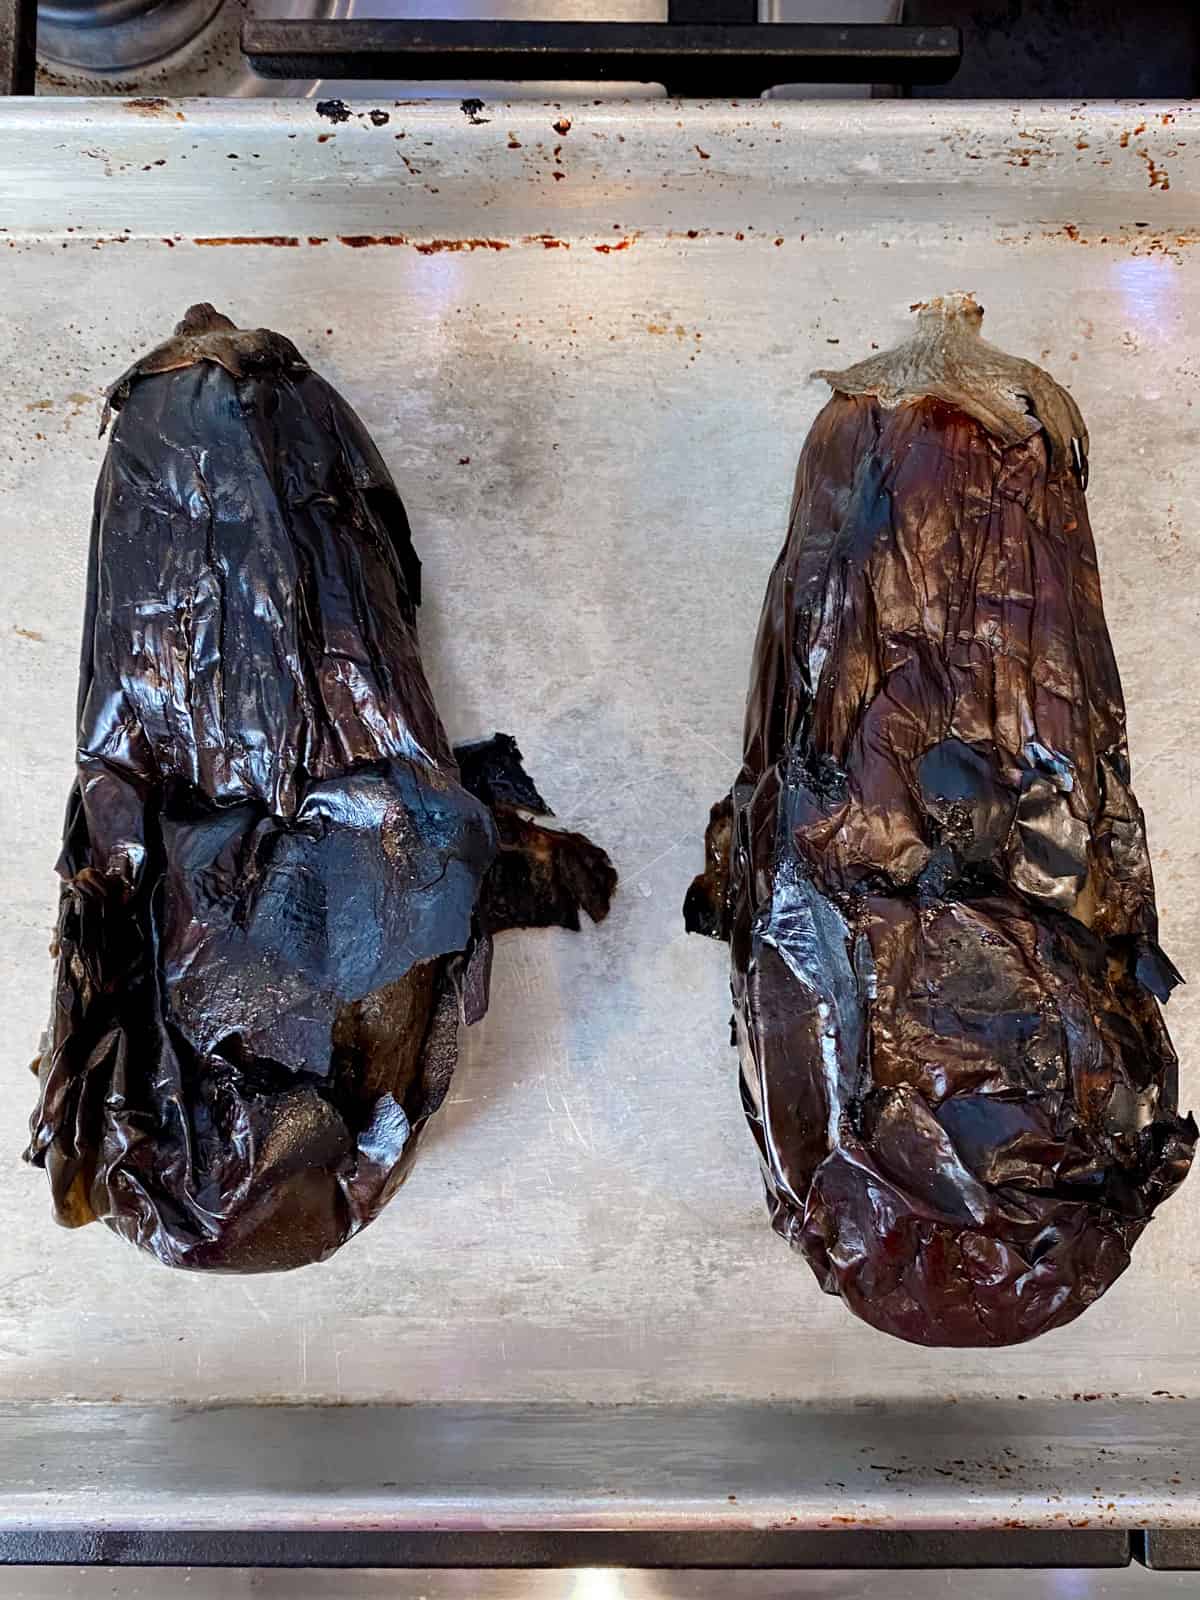 Once the eggplant is charred, the peel should be charred and begin to peel away from the flesh.